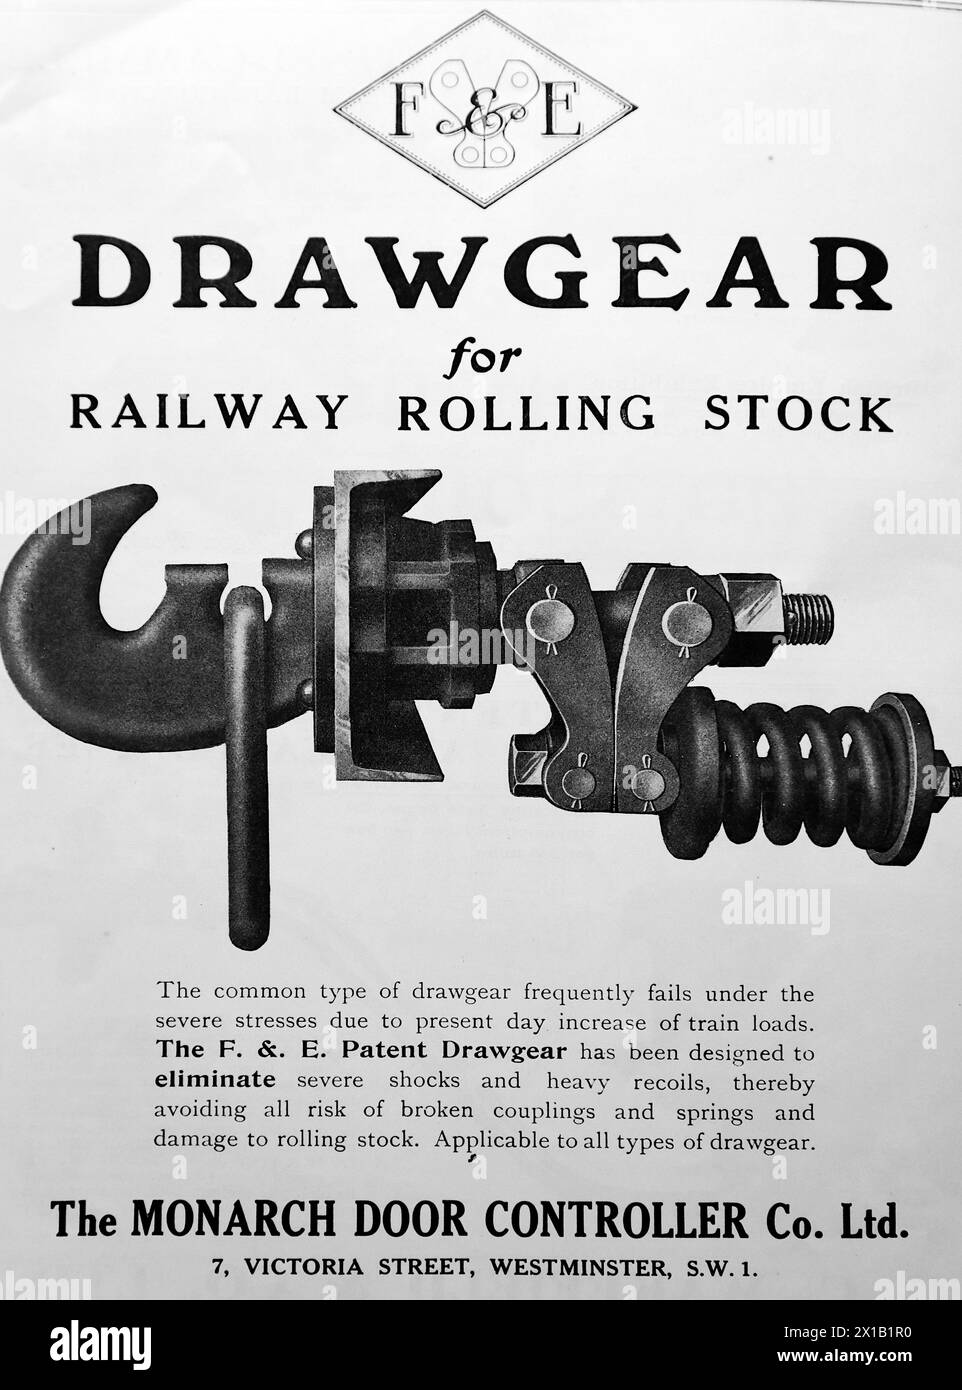 Advertisement for The Monarch Door Controller Co. Ltd, of Westminster, London. The F. & E. Patent Drawgear for railway rolling stock. From an original publication dated 15 May 1924, this helps to give an insight into public transport, and the railways in particular, of the 1920s. Stock Photo